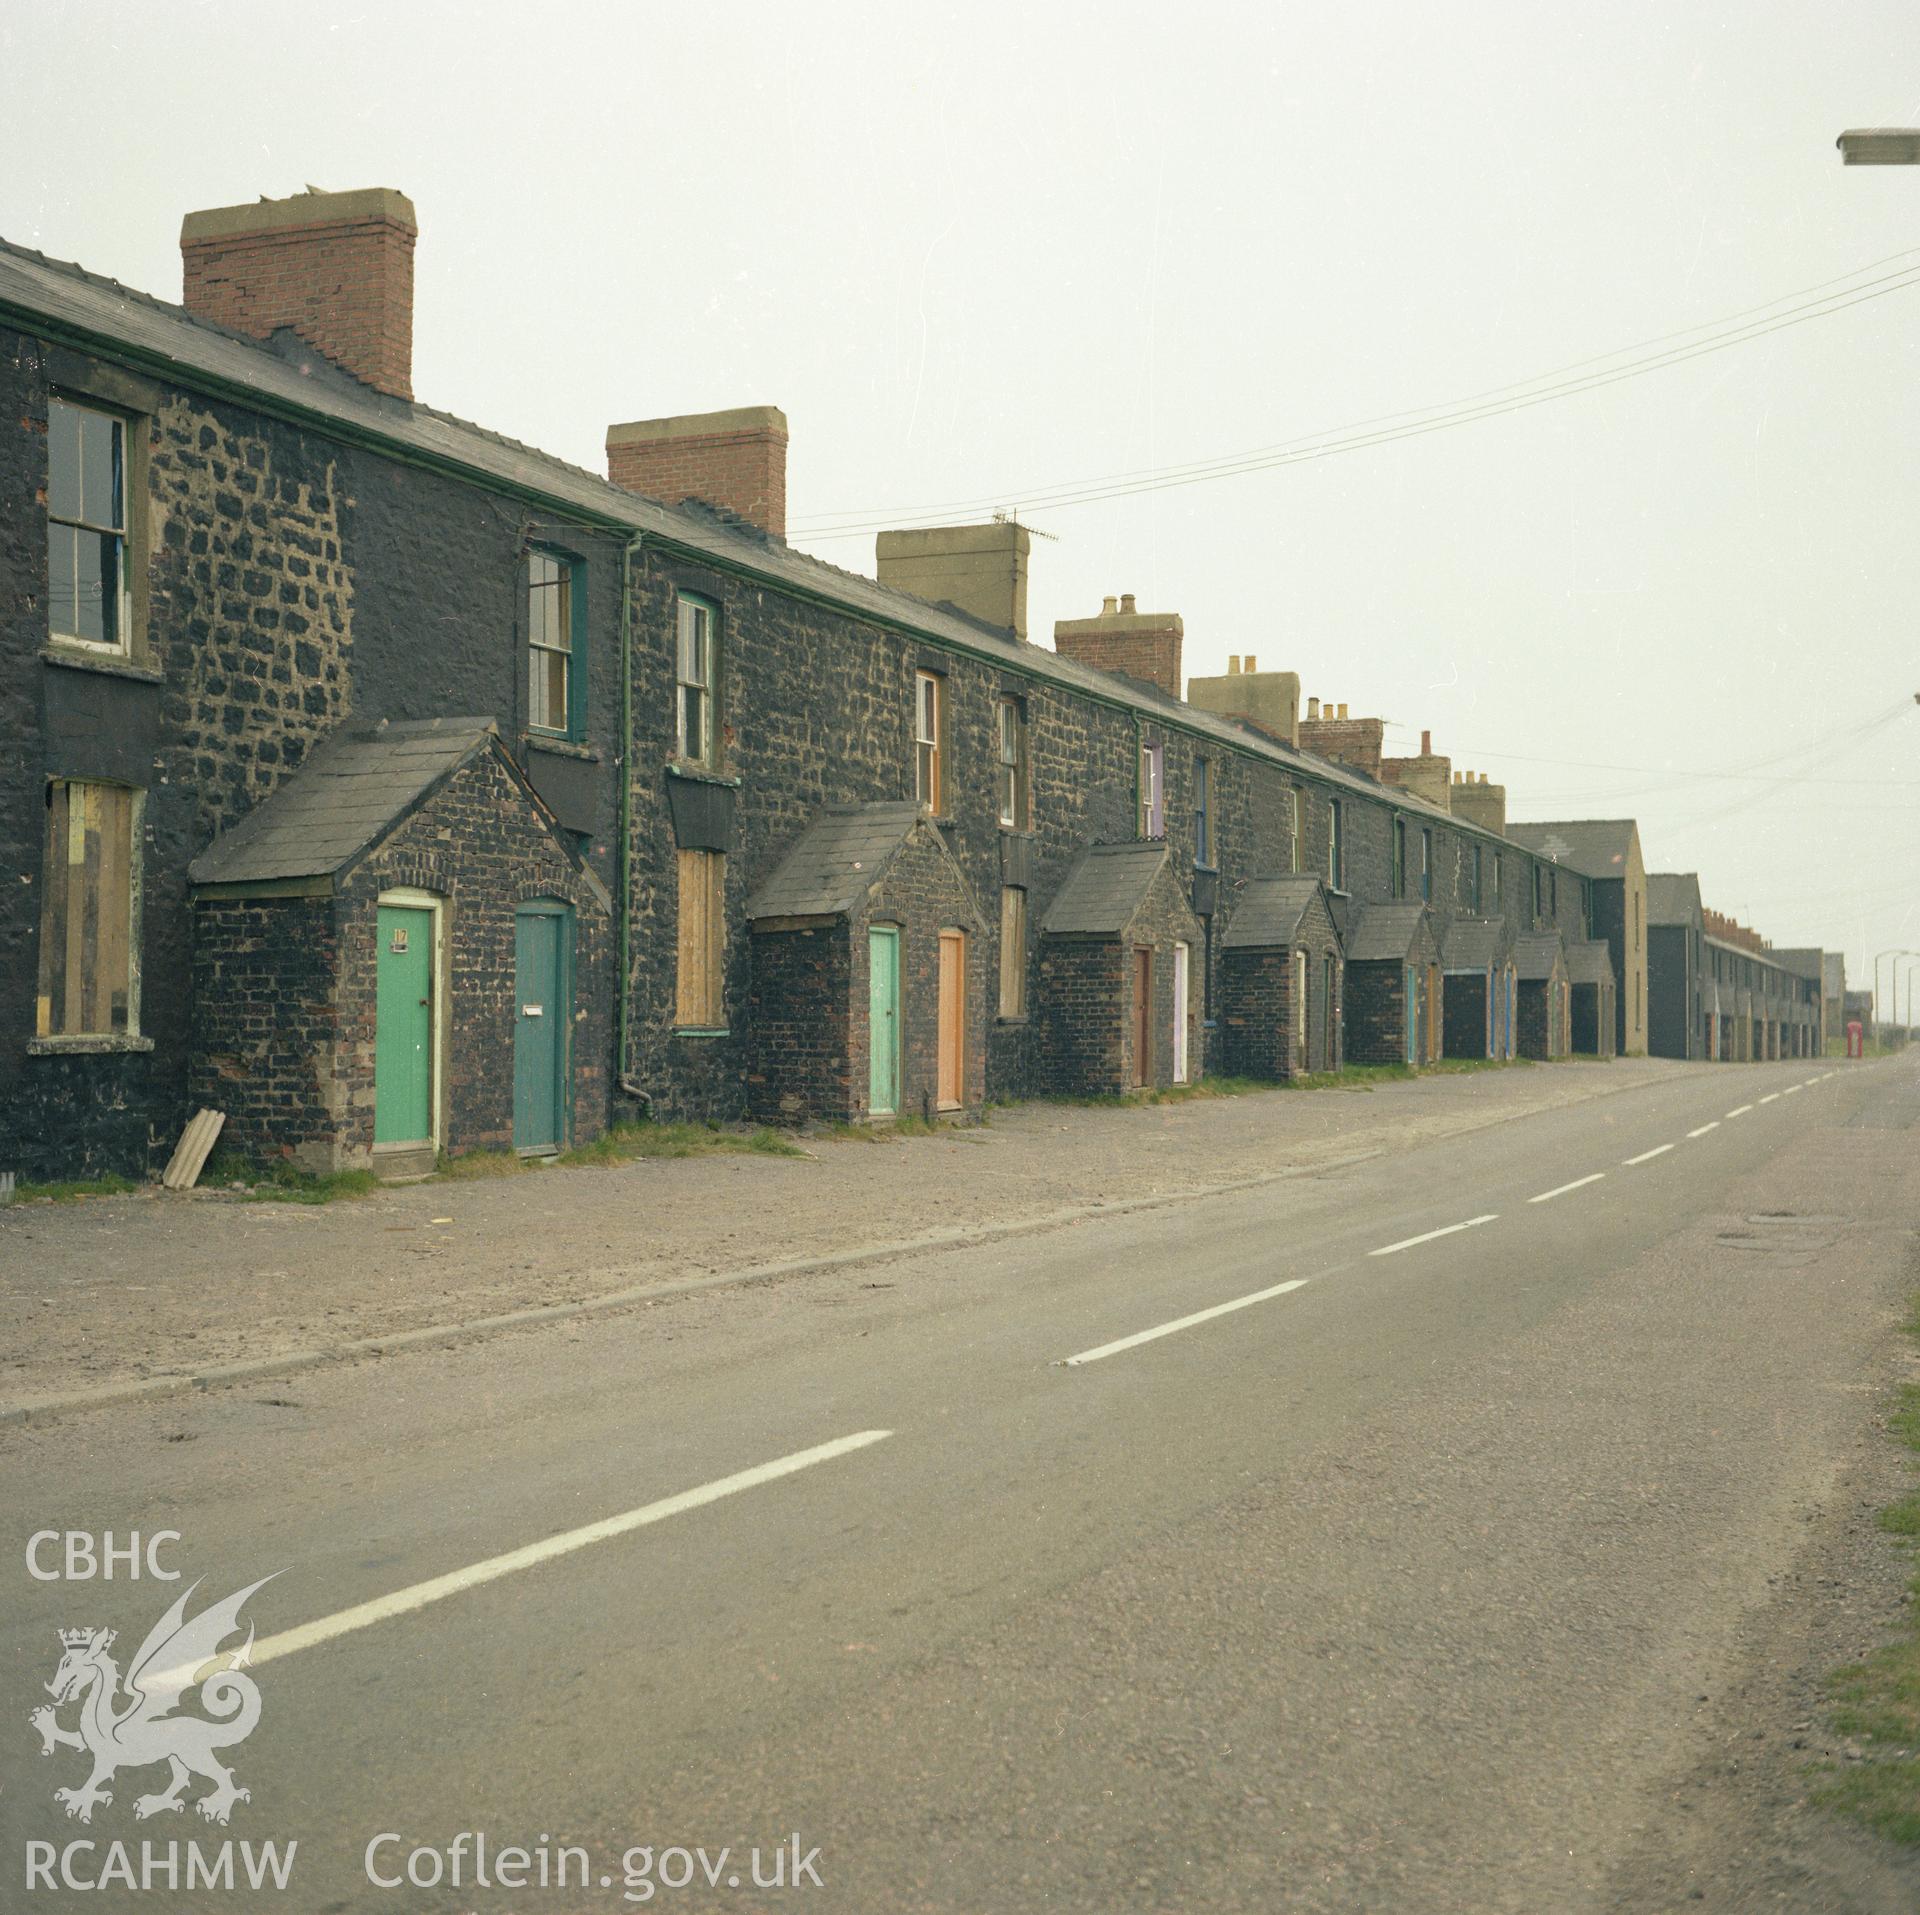 Digital copy of an acetate negative showing housing at the Garn, Big Pit, from the John Cornwell Collection.